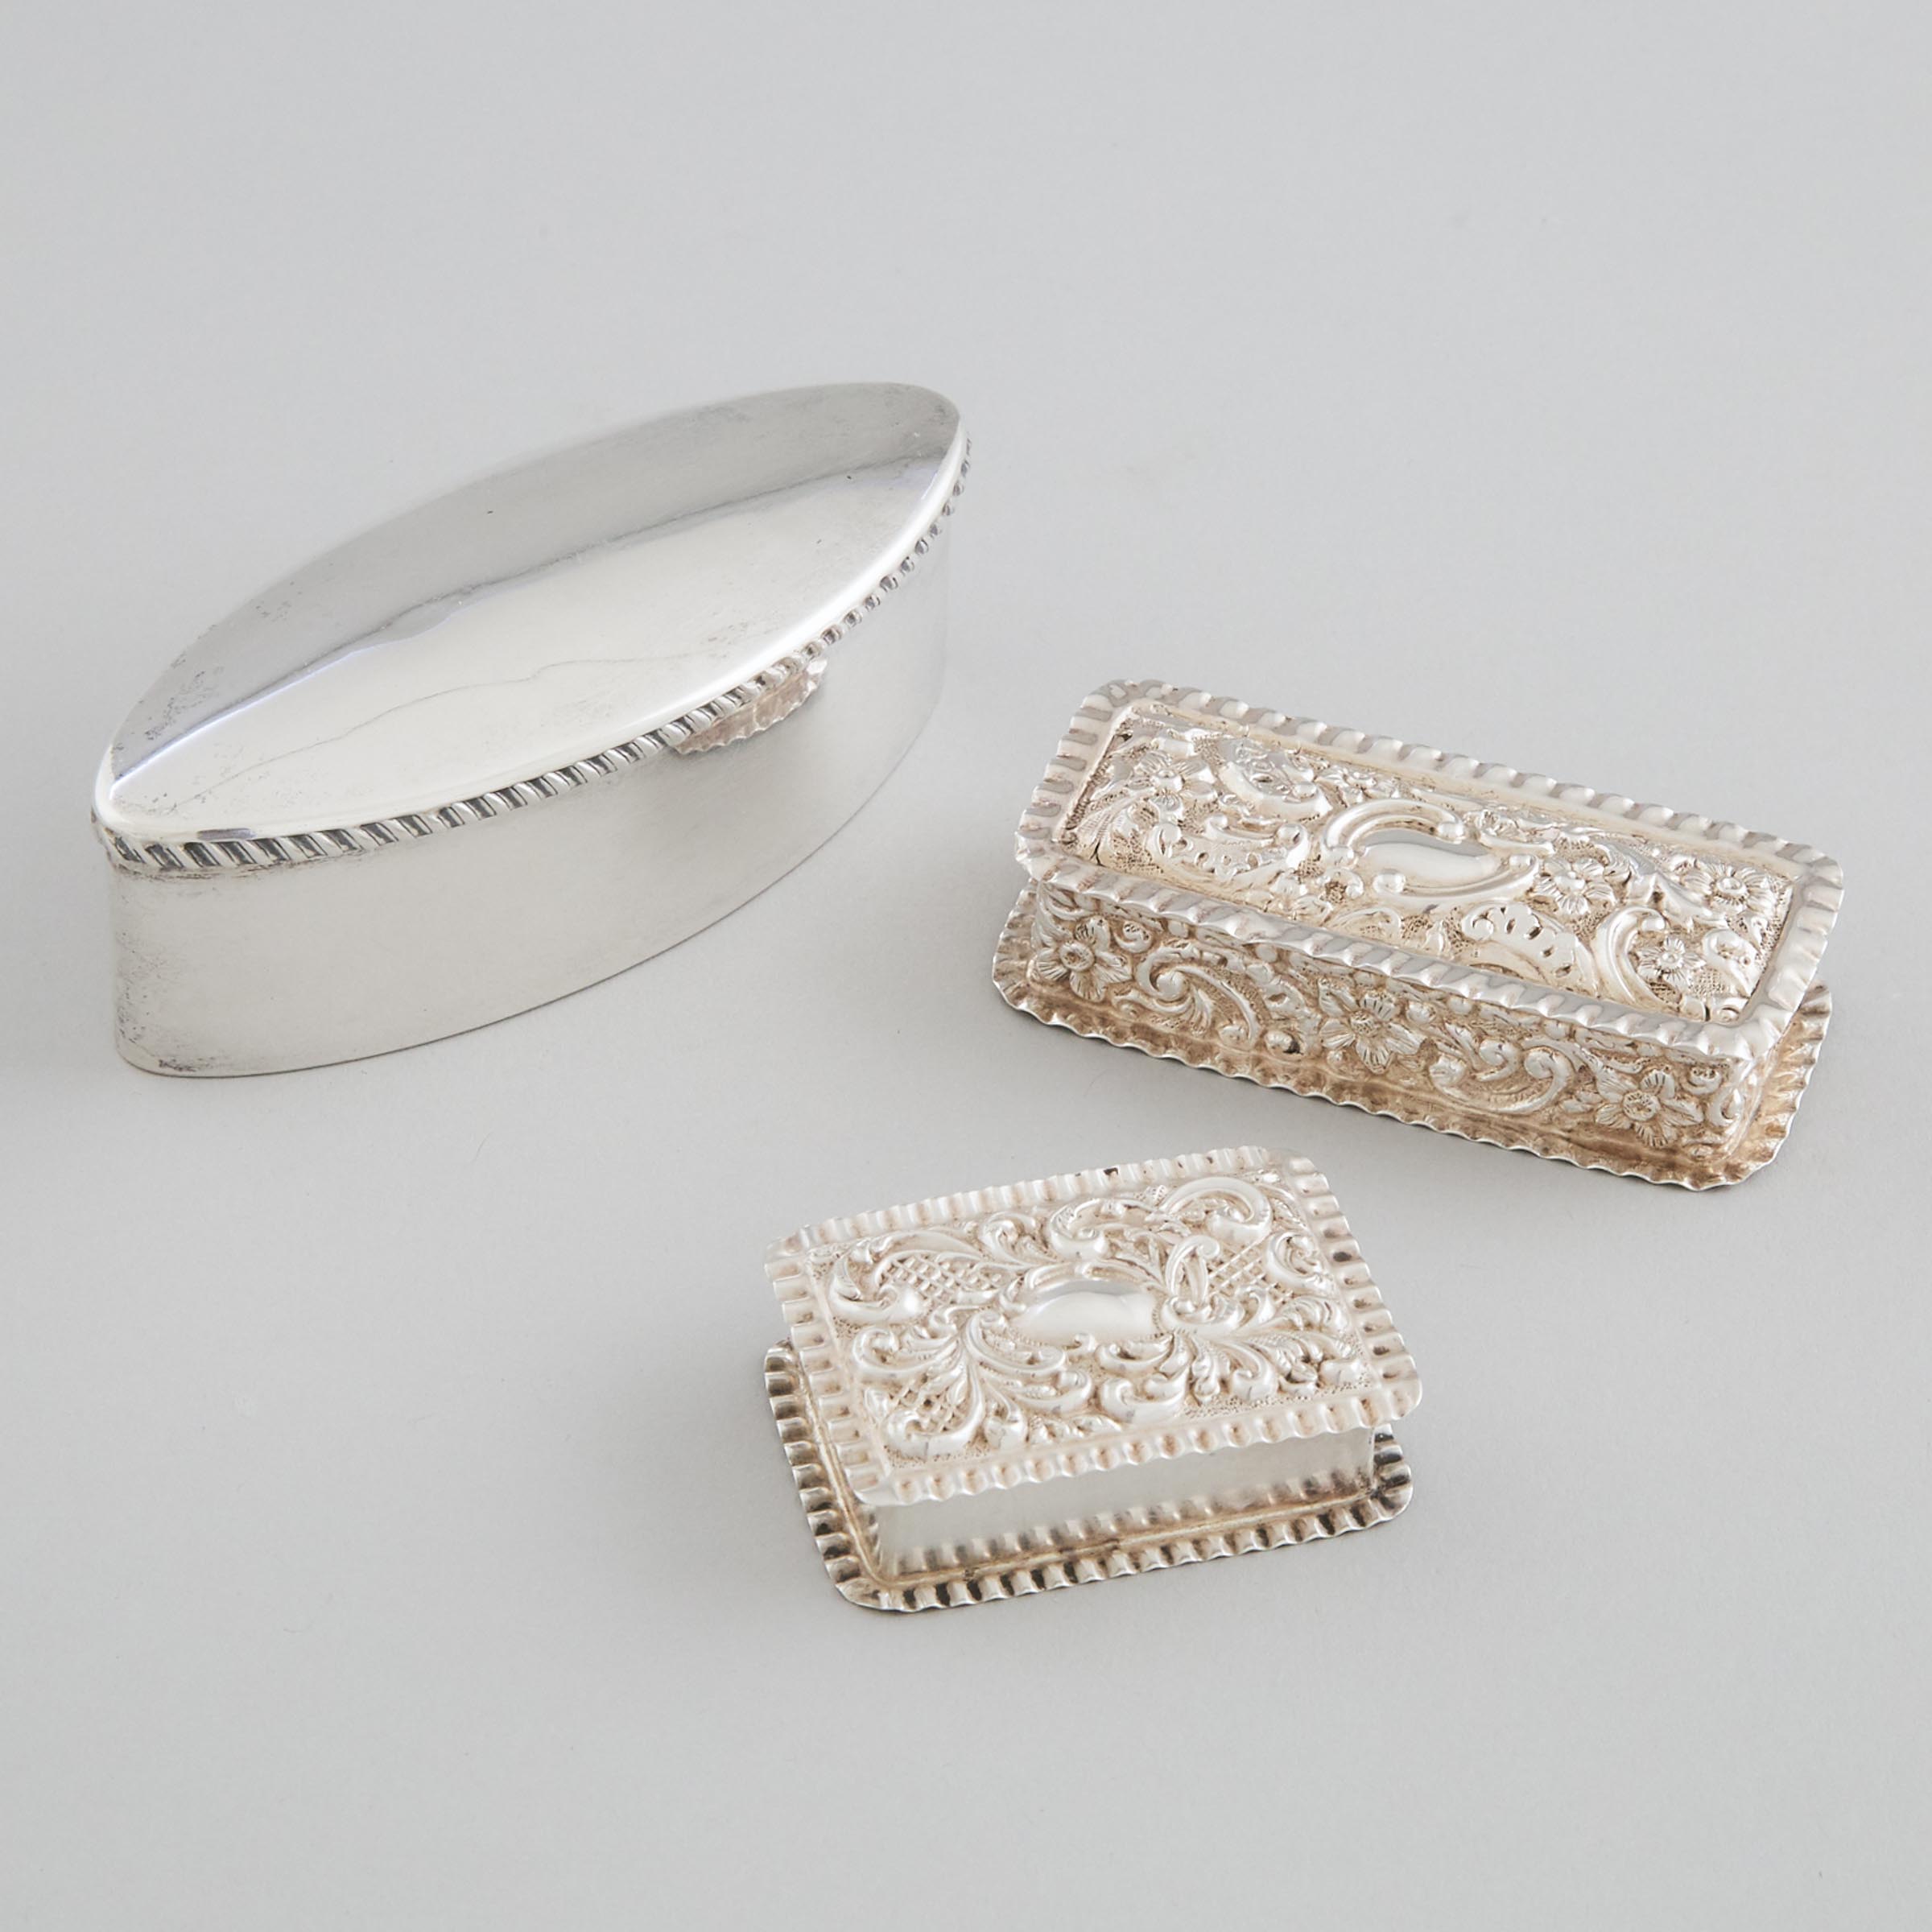 Edwardian Silver Oval Ring Box and Two Rectangular Boxes, Stokes & Ireland, Chester, 1904, Synyer & Beddoes, Birmingham, 1899 and Adie & Lovekin, 1902